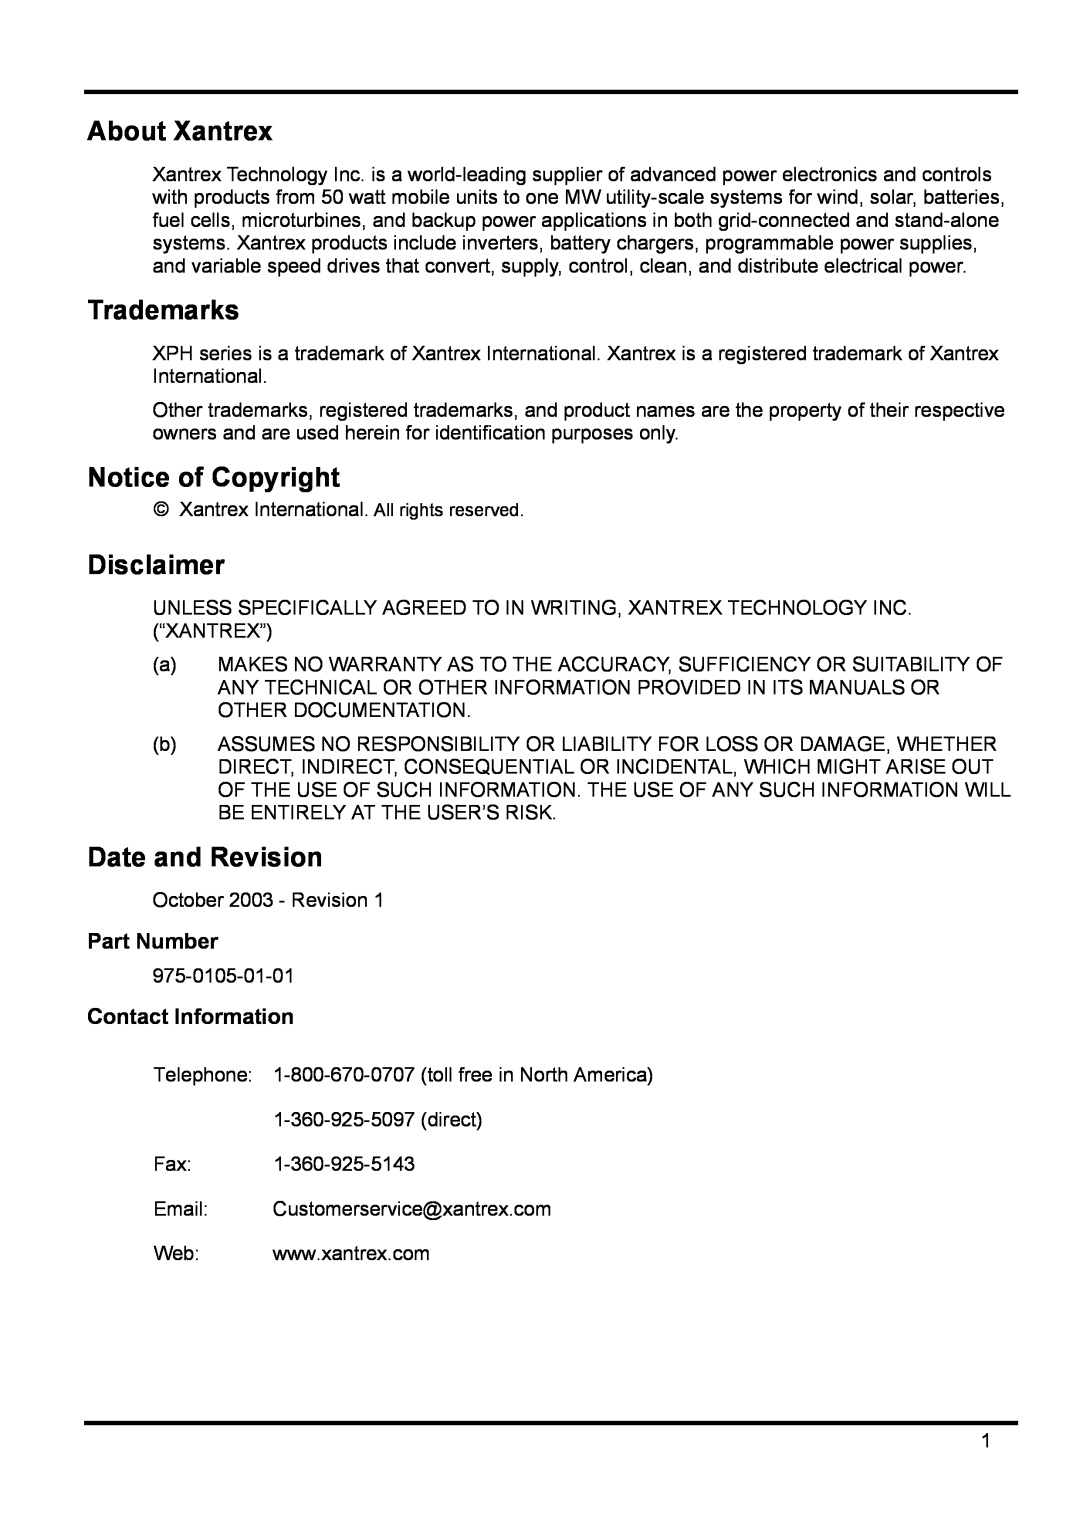 Xantrex Technology 42V 10A About Xantrex, Trademarks, Notice of Copyright, Disclaimer, Date and Revision, Part Number 